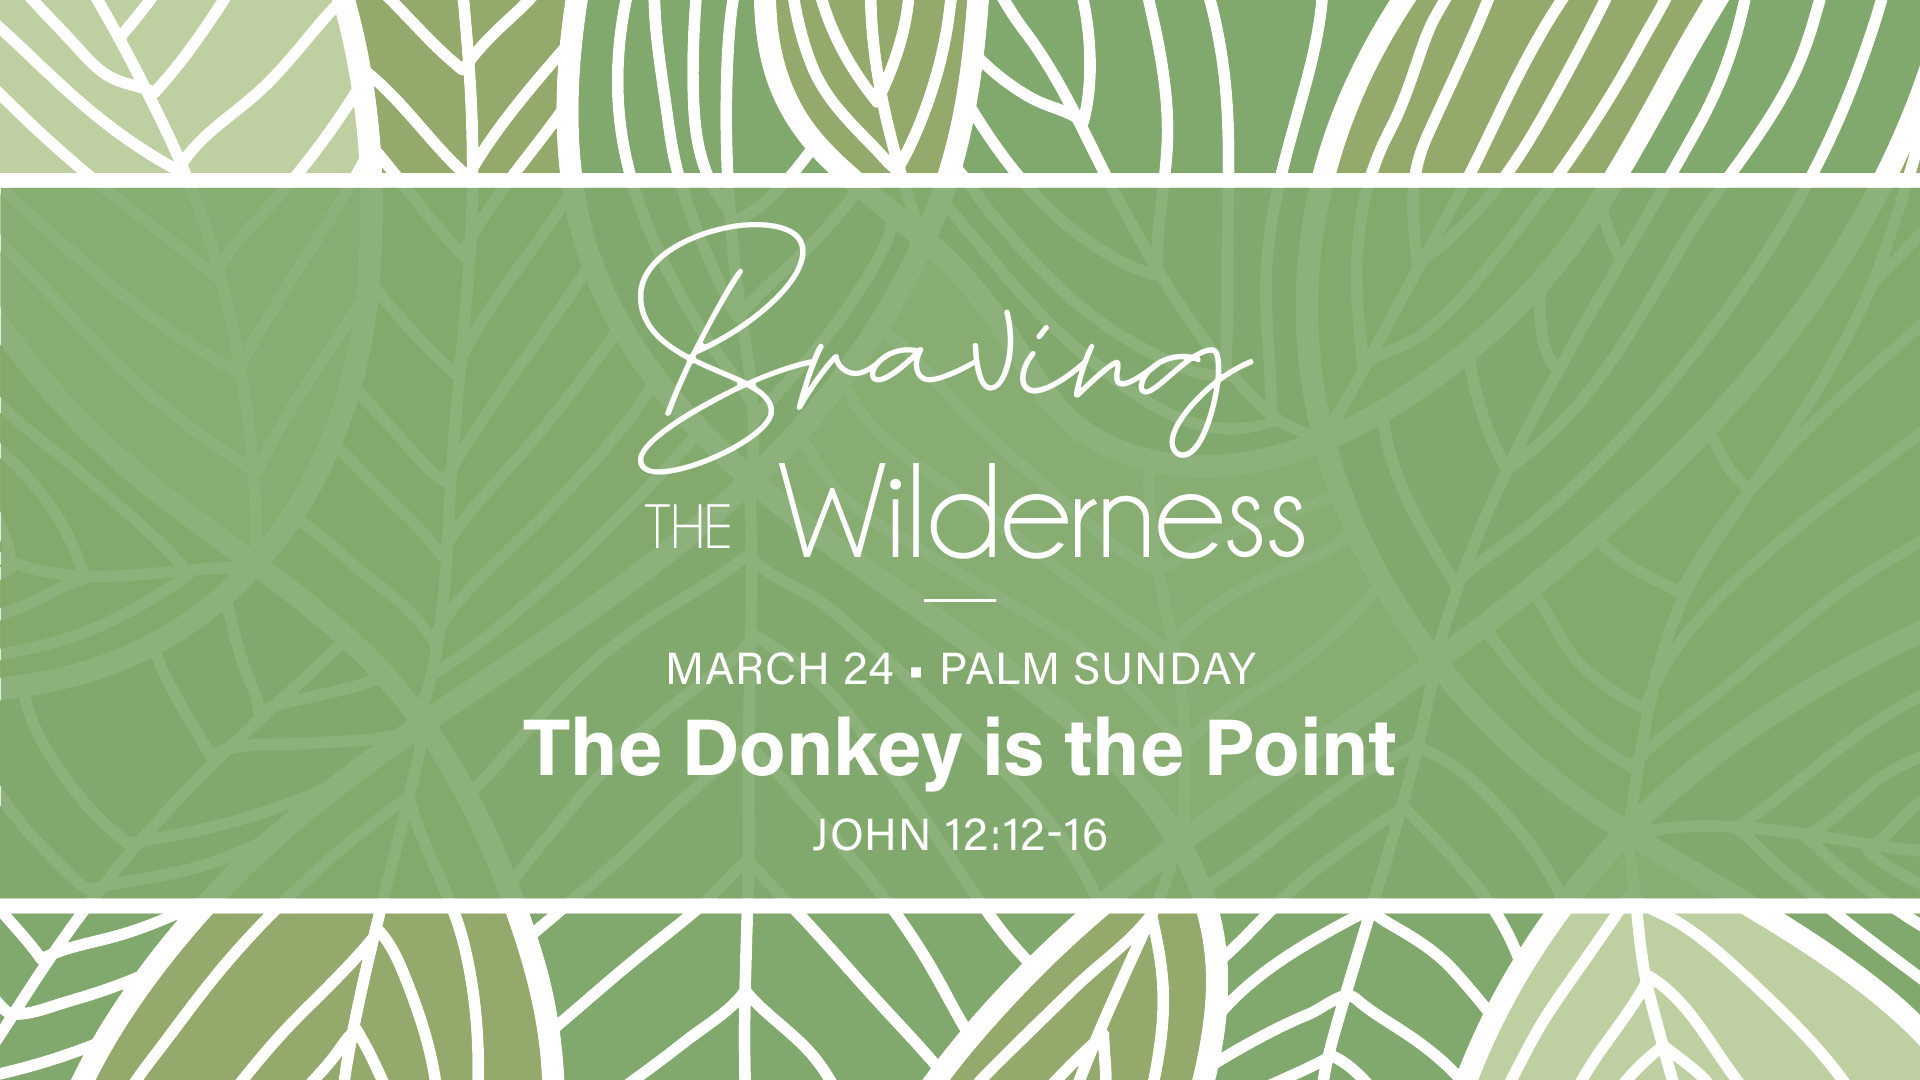 Braving the Wilderness: The Donkey is the Point